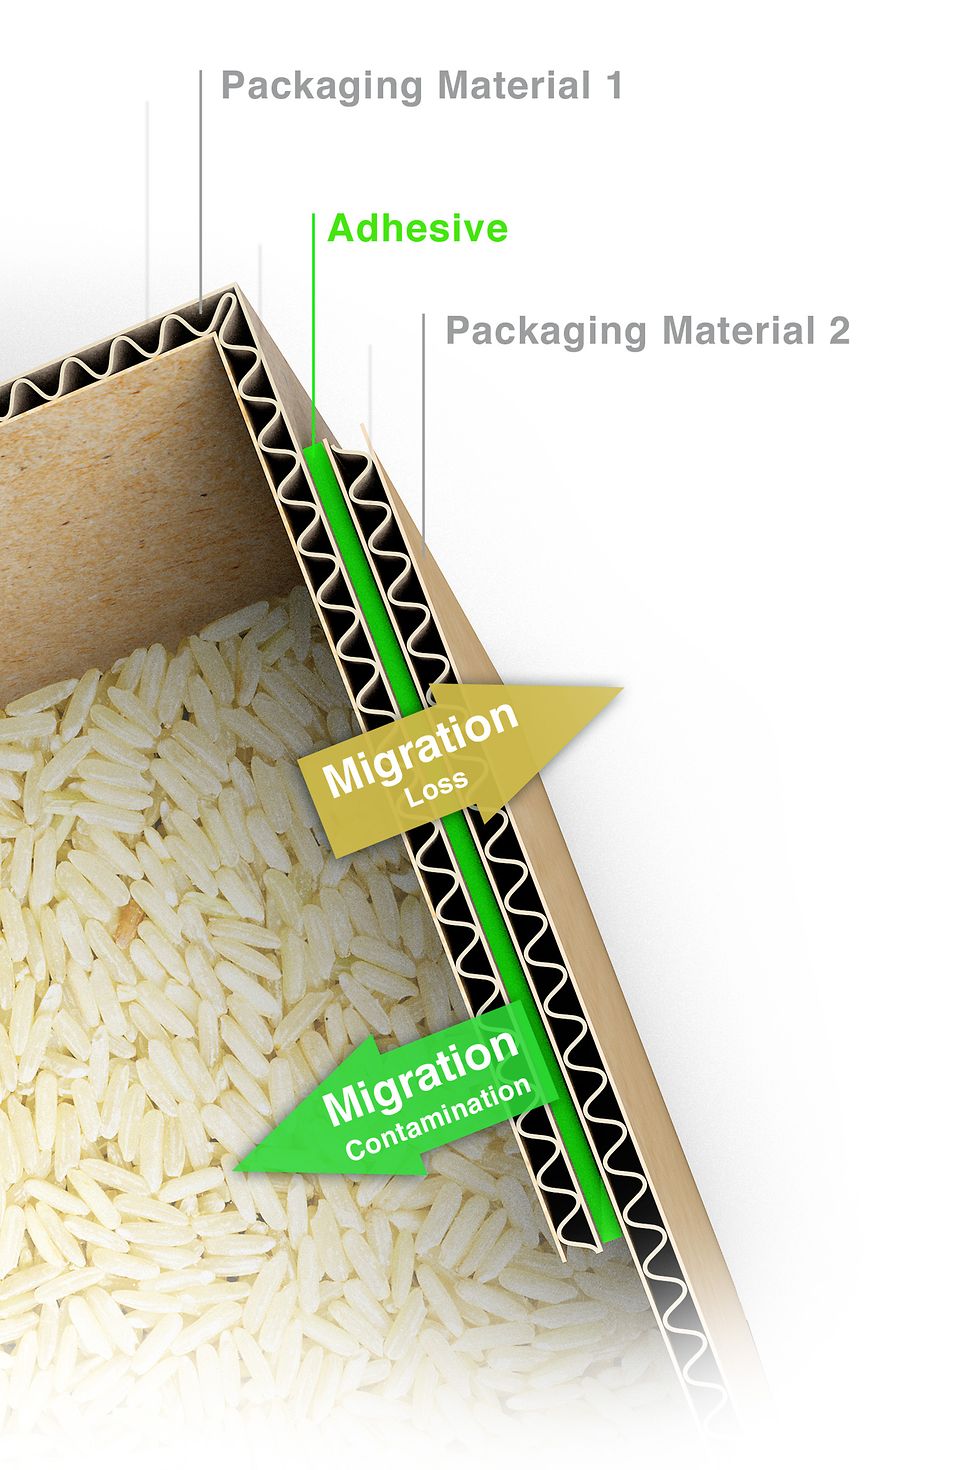 Henkel offers reliable adhesive solutions for food packagings